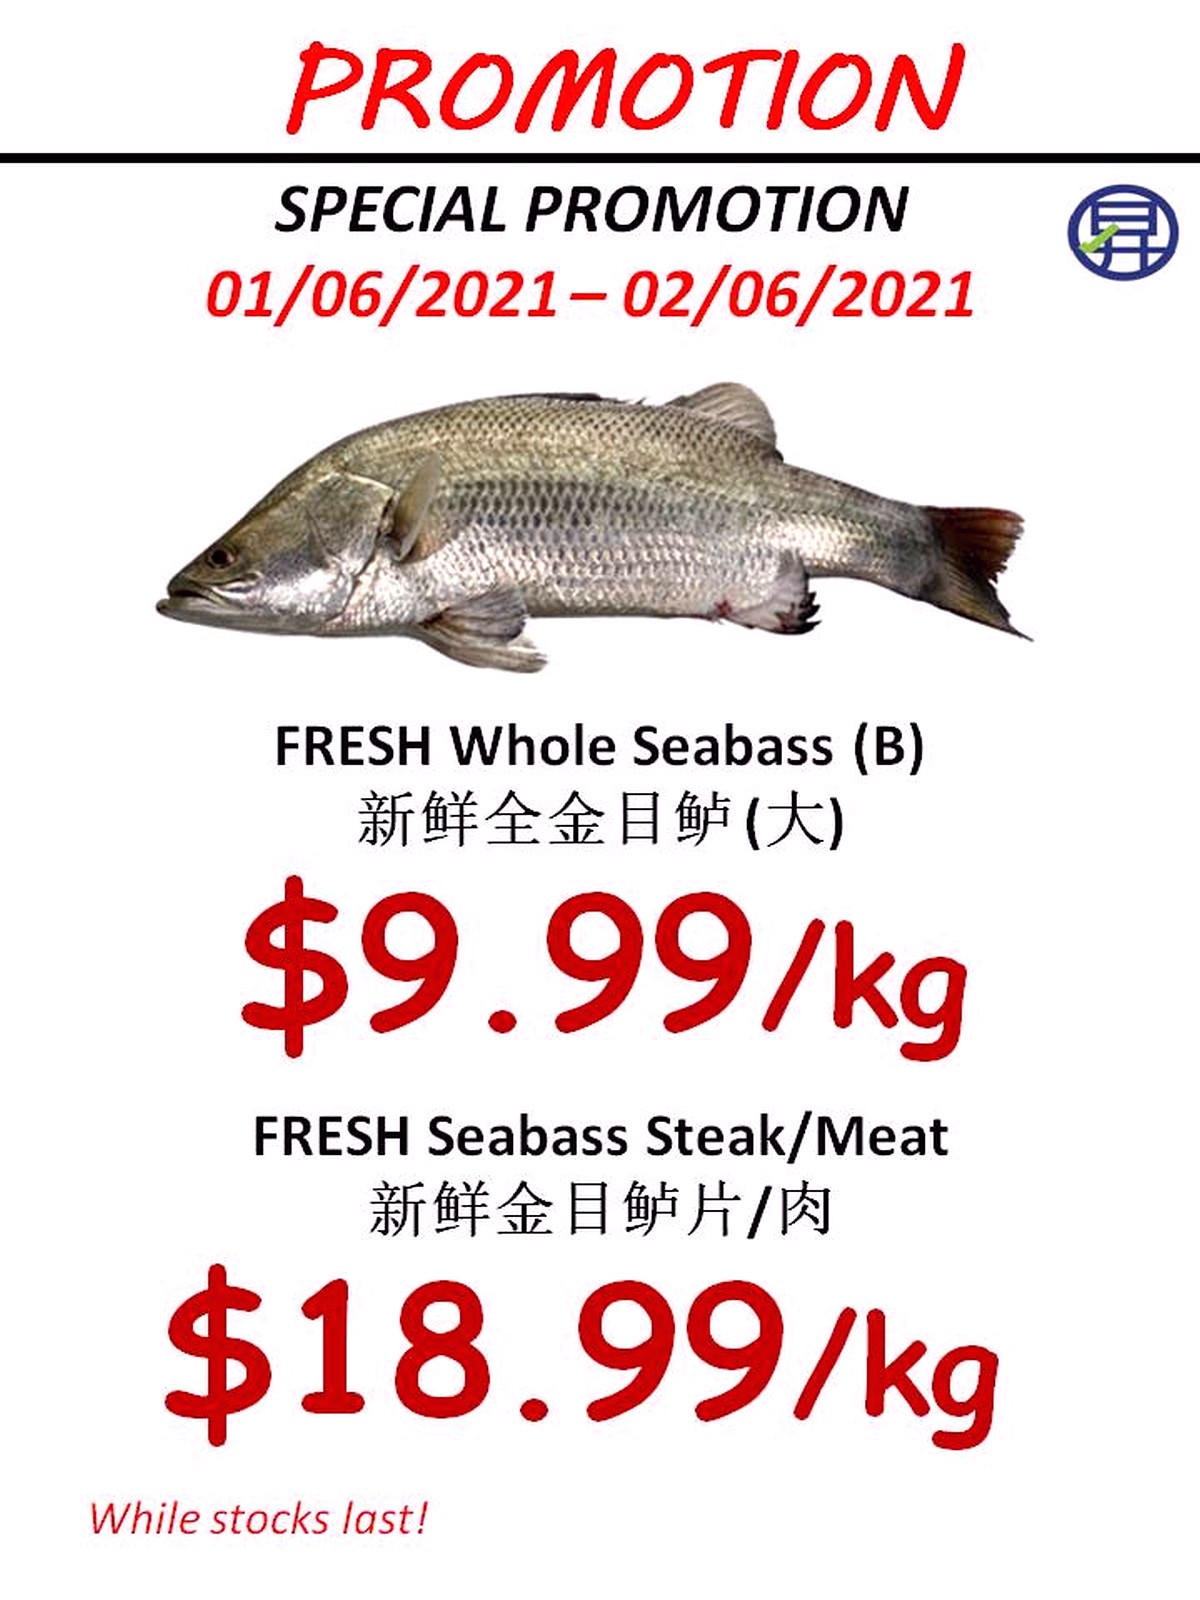 Sheng-Siong-Today-Fresh-Fish-Seafood-Promotion-2021-Singapore-00c Now till 17 Jun  2021: Sheng Siong Mega Promotion! 2 Fresh Seabass for $9.88 only